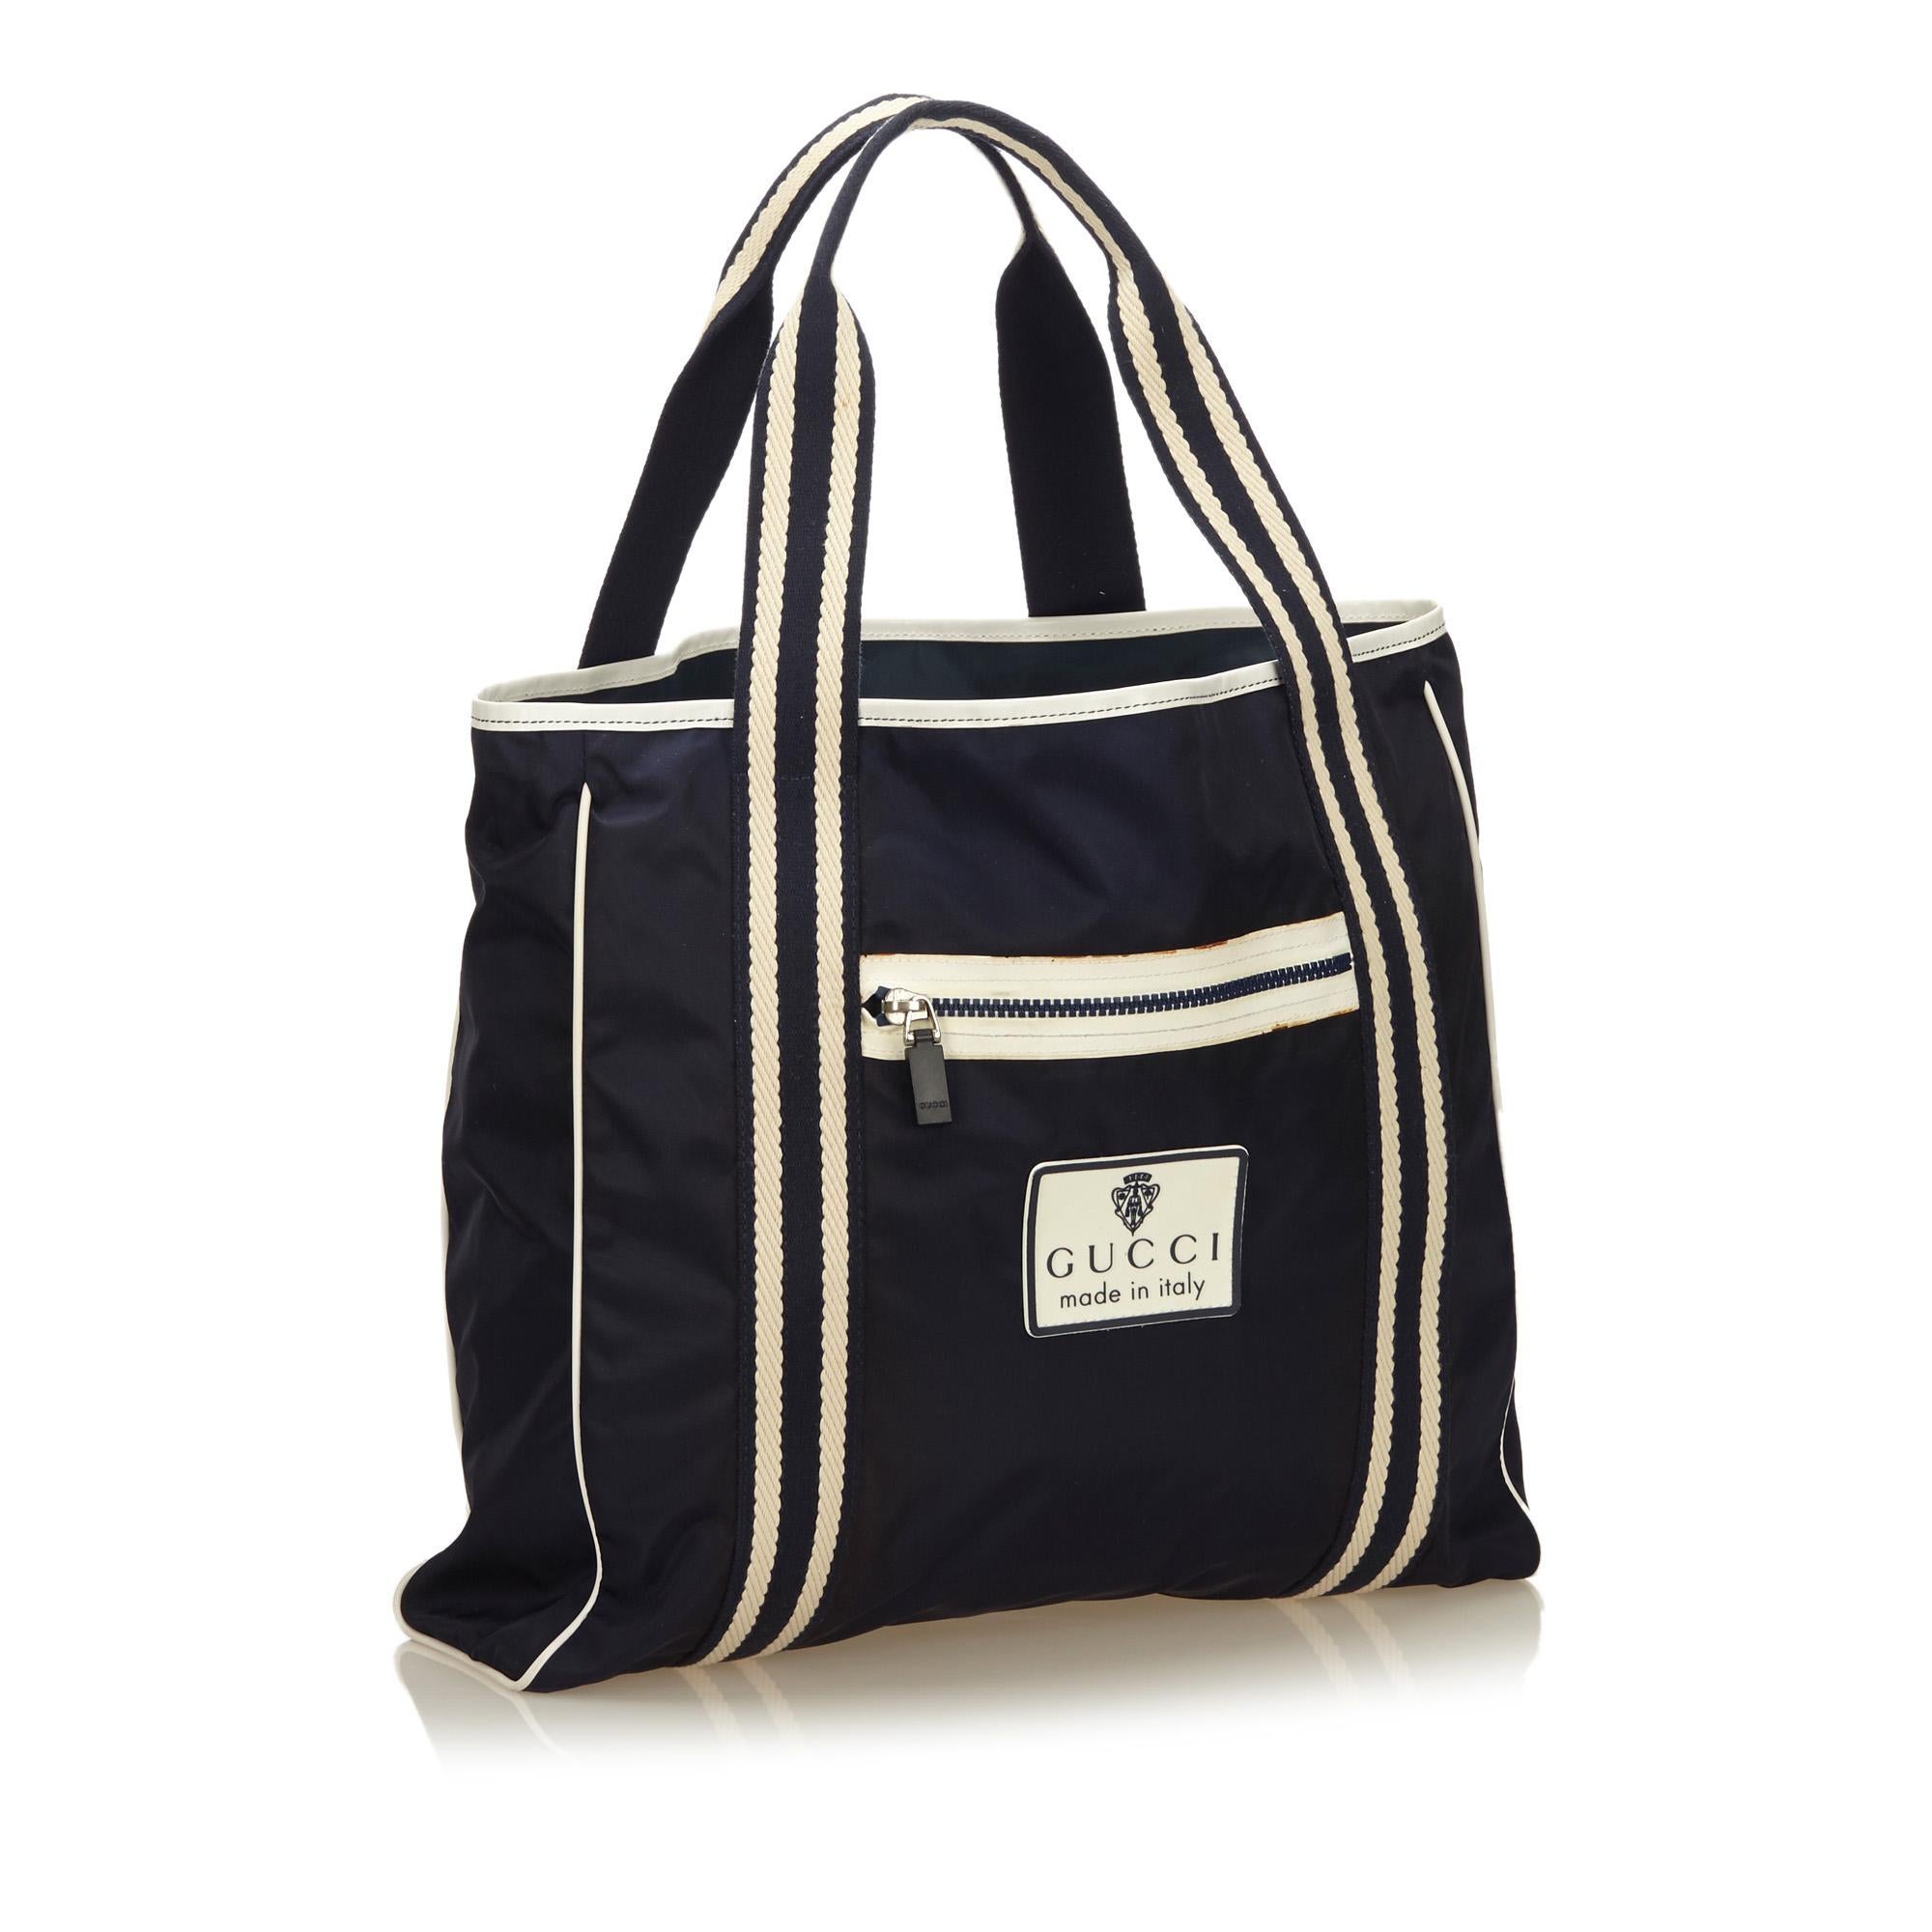 This tote bag features a nylon body, flat shoulder straps, open top, exterior zip pocket, and an interior pocket.

It carries a B+ condition rating.

Dimensions: 
Length 36.00 cm
Width 44.00 cm
Depth 6.00 cm
Shoulder Drop 16.00 cm

Inclusions: No